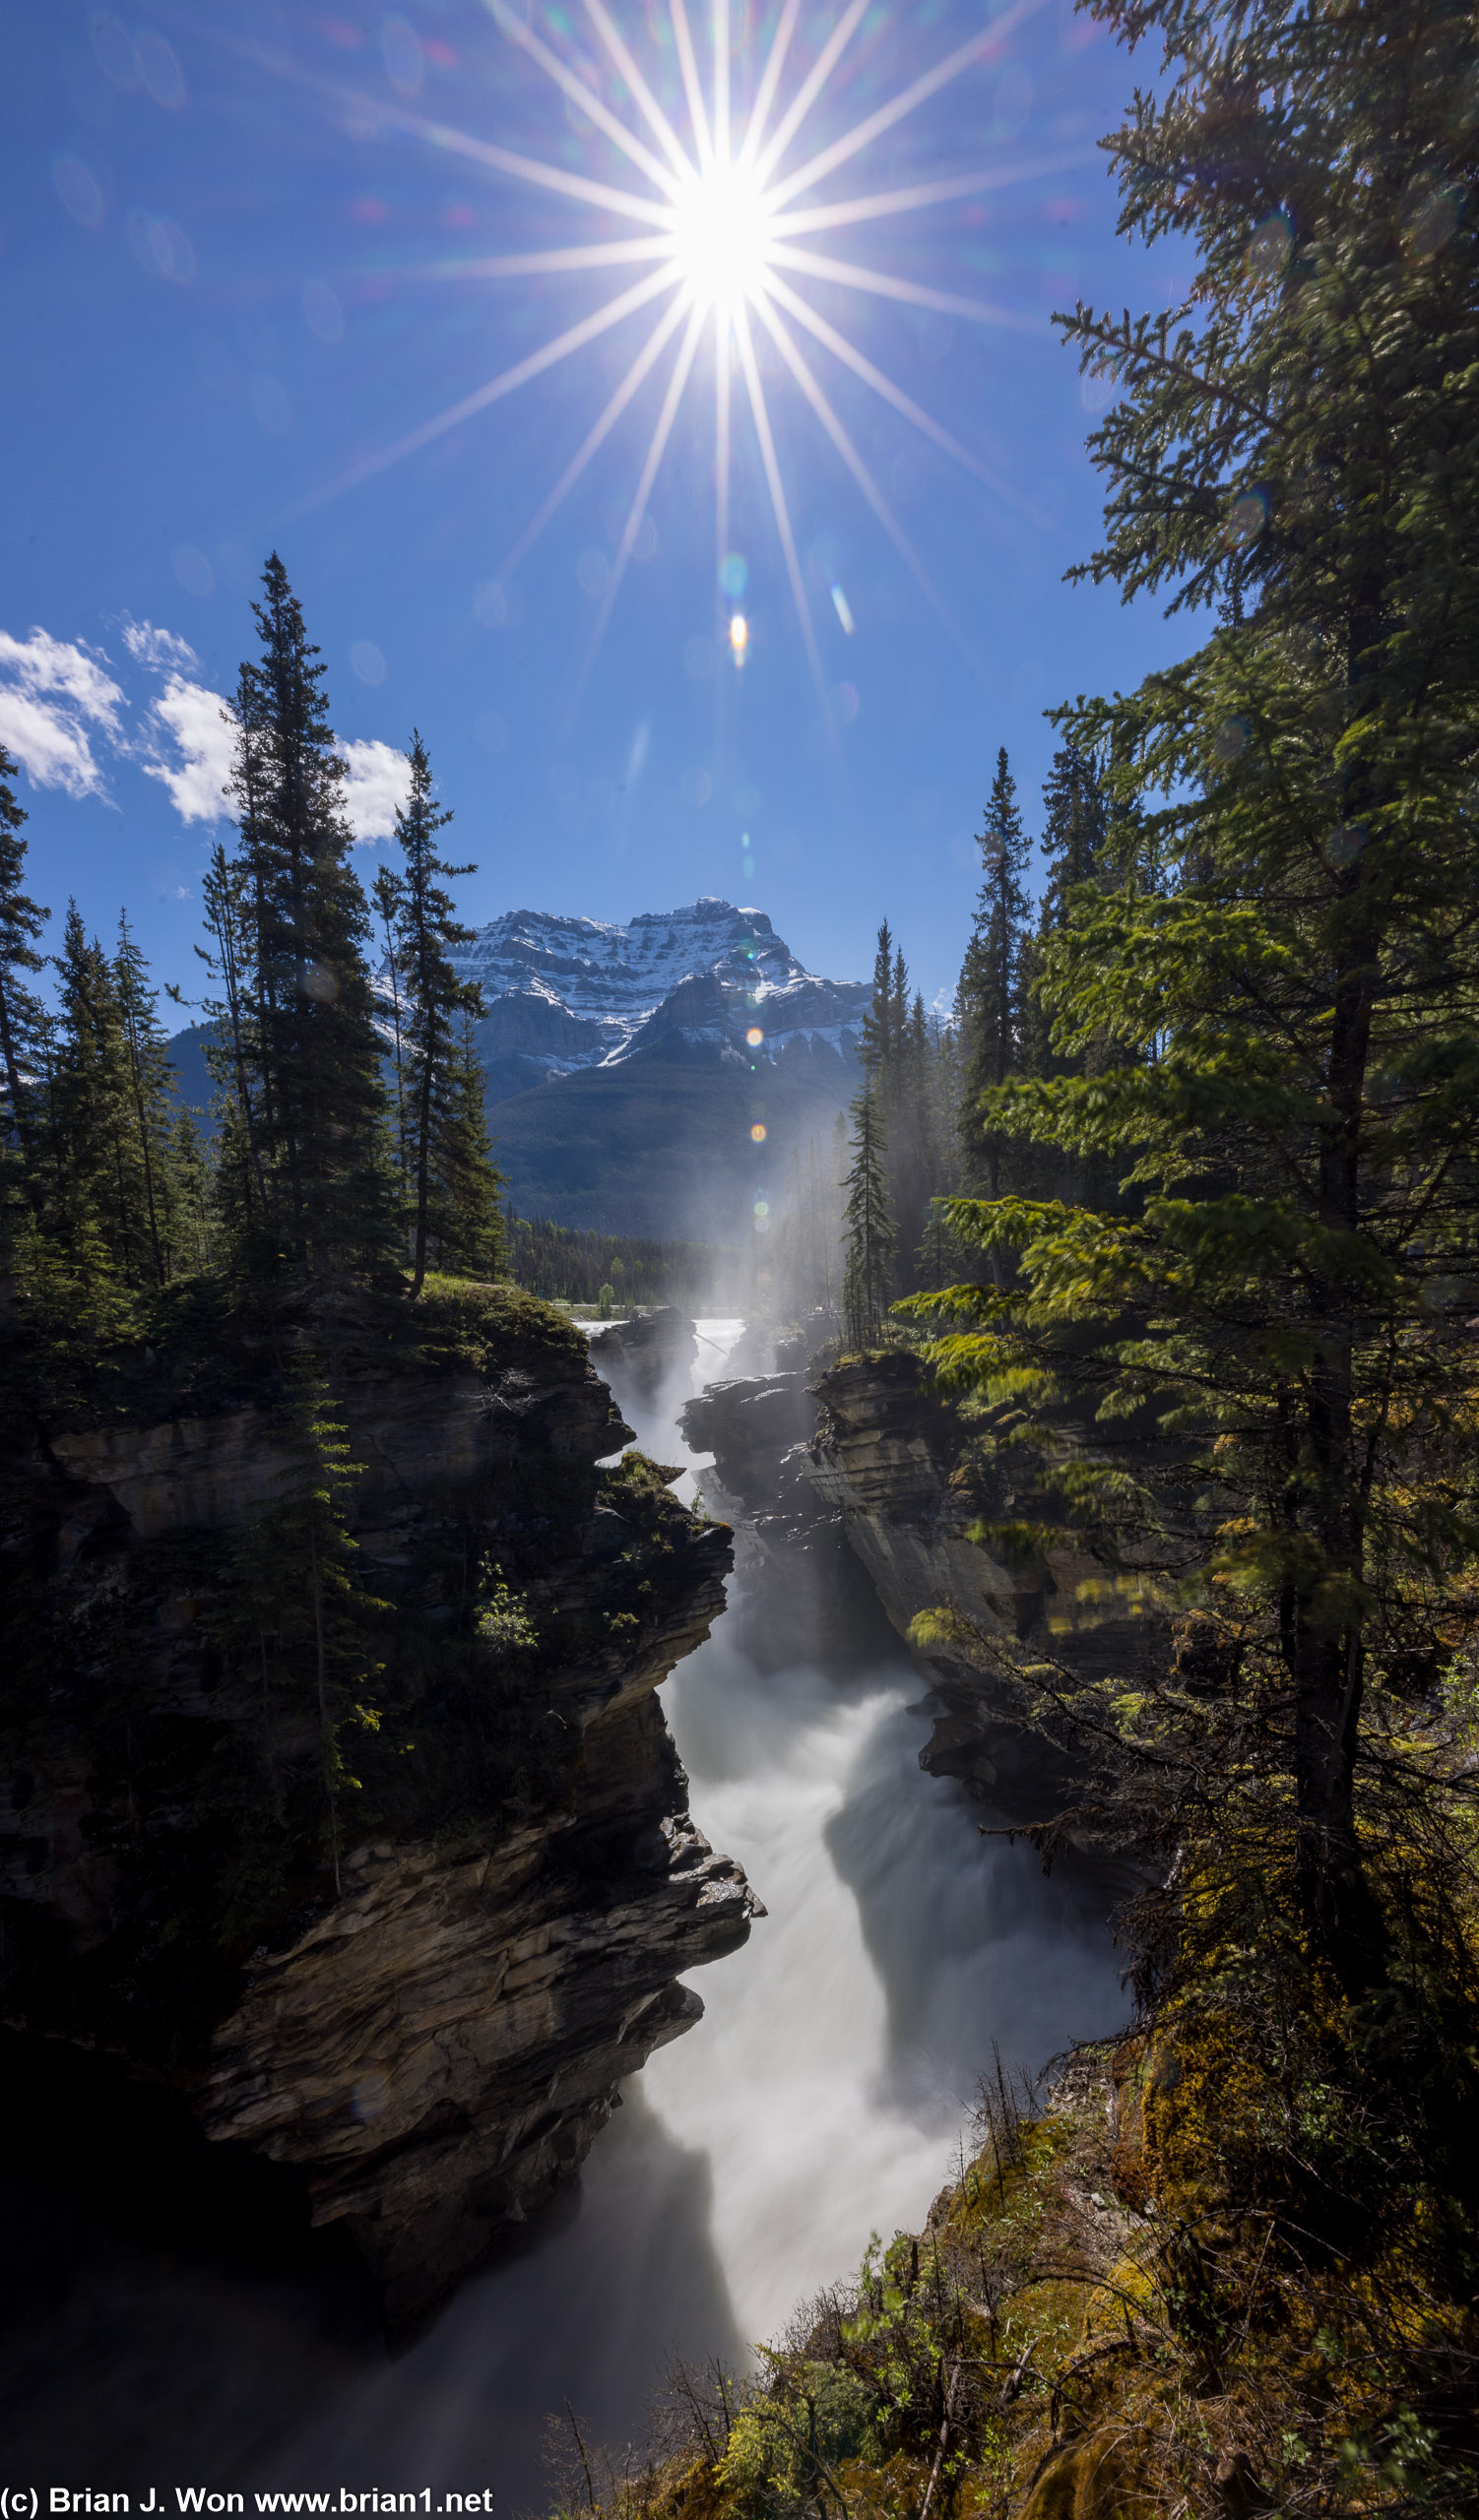 Playing with long exposures for Athabasca Falls.